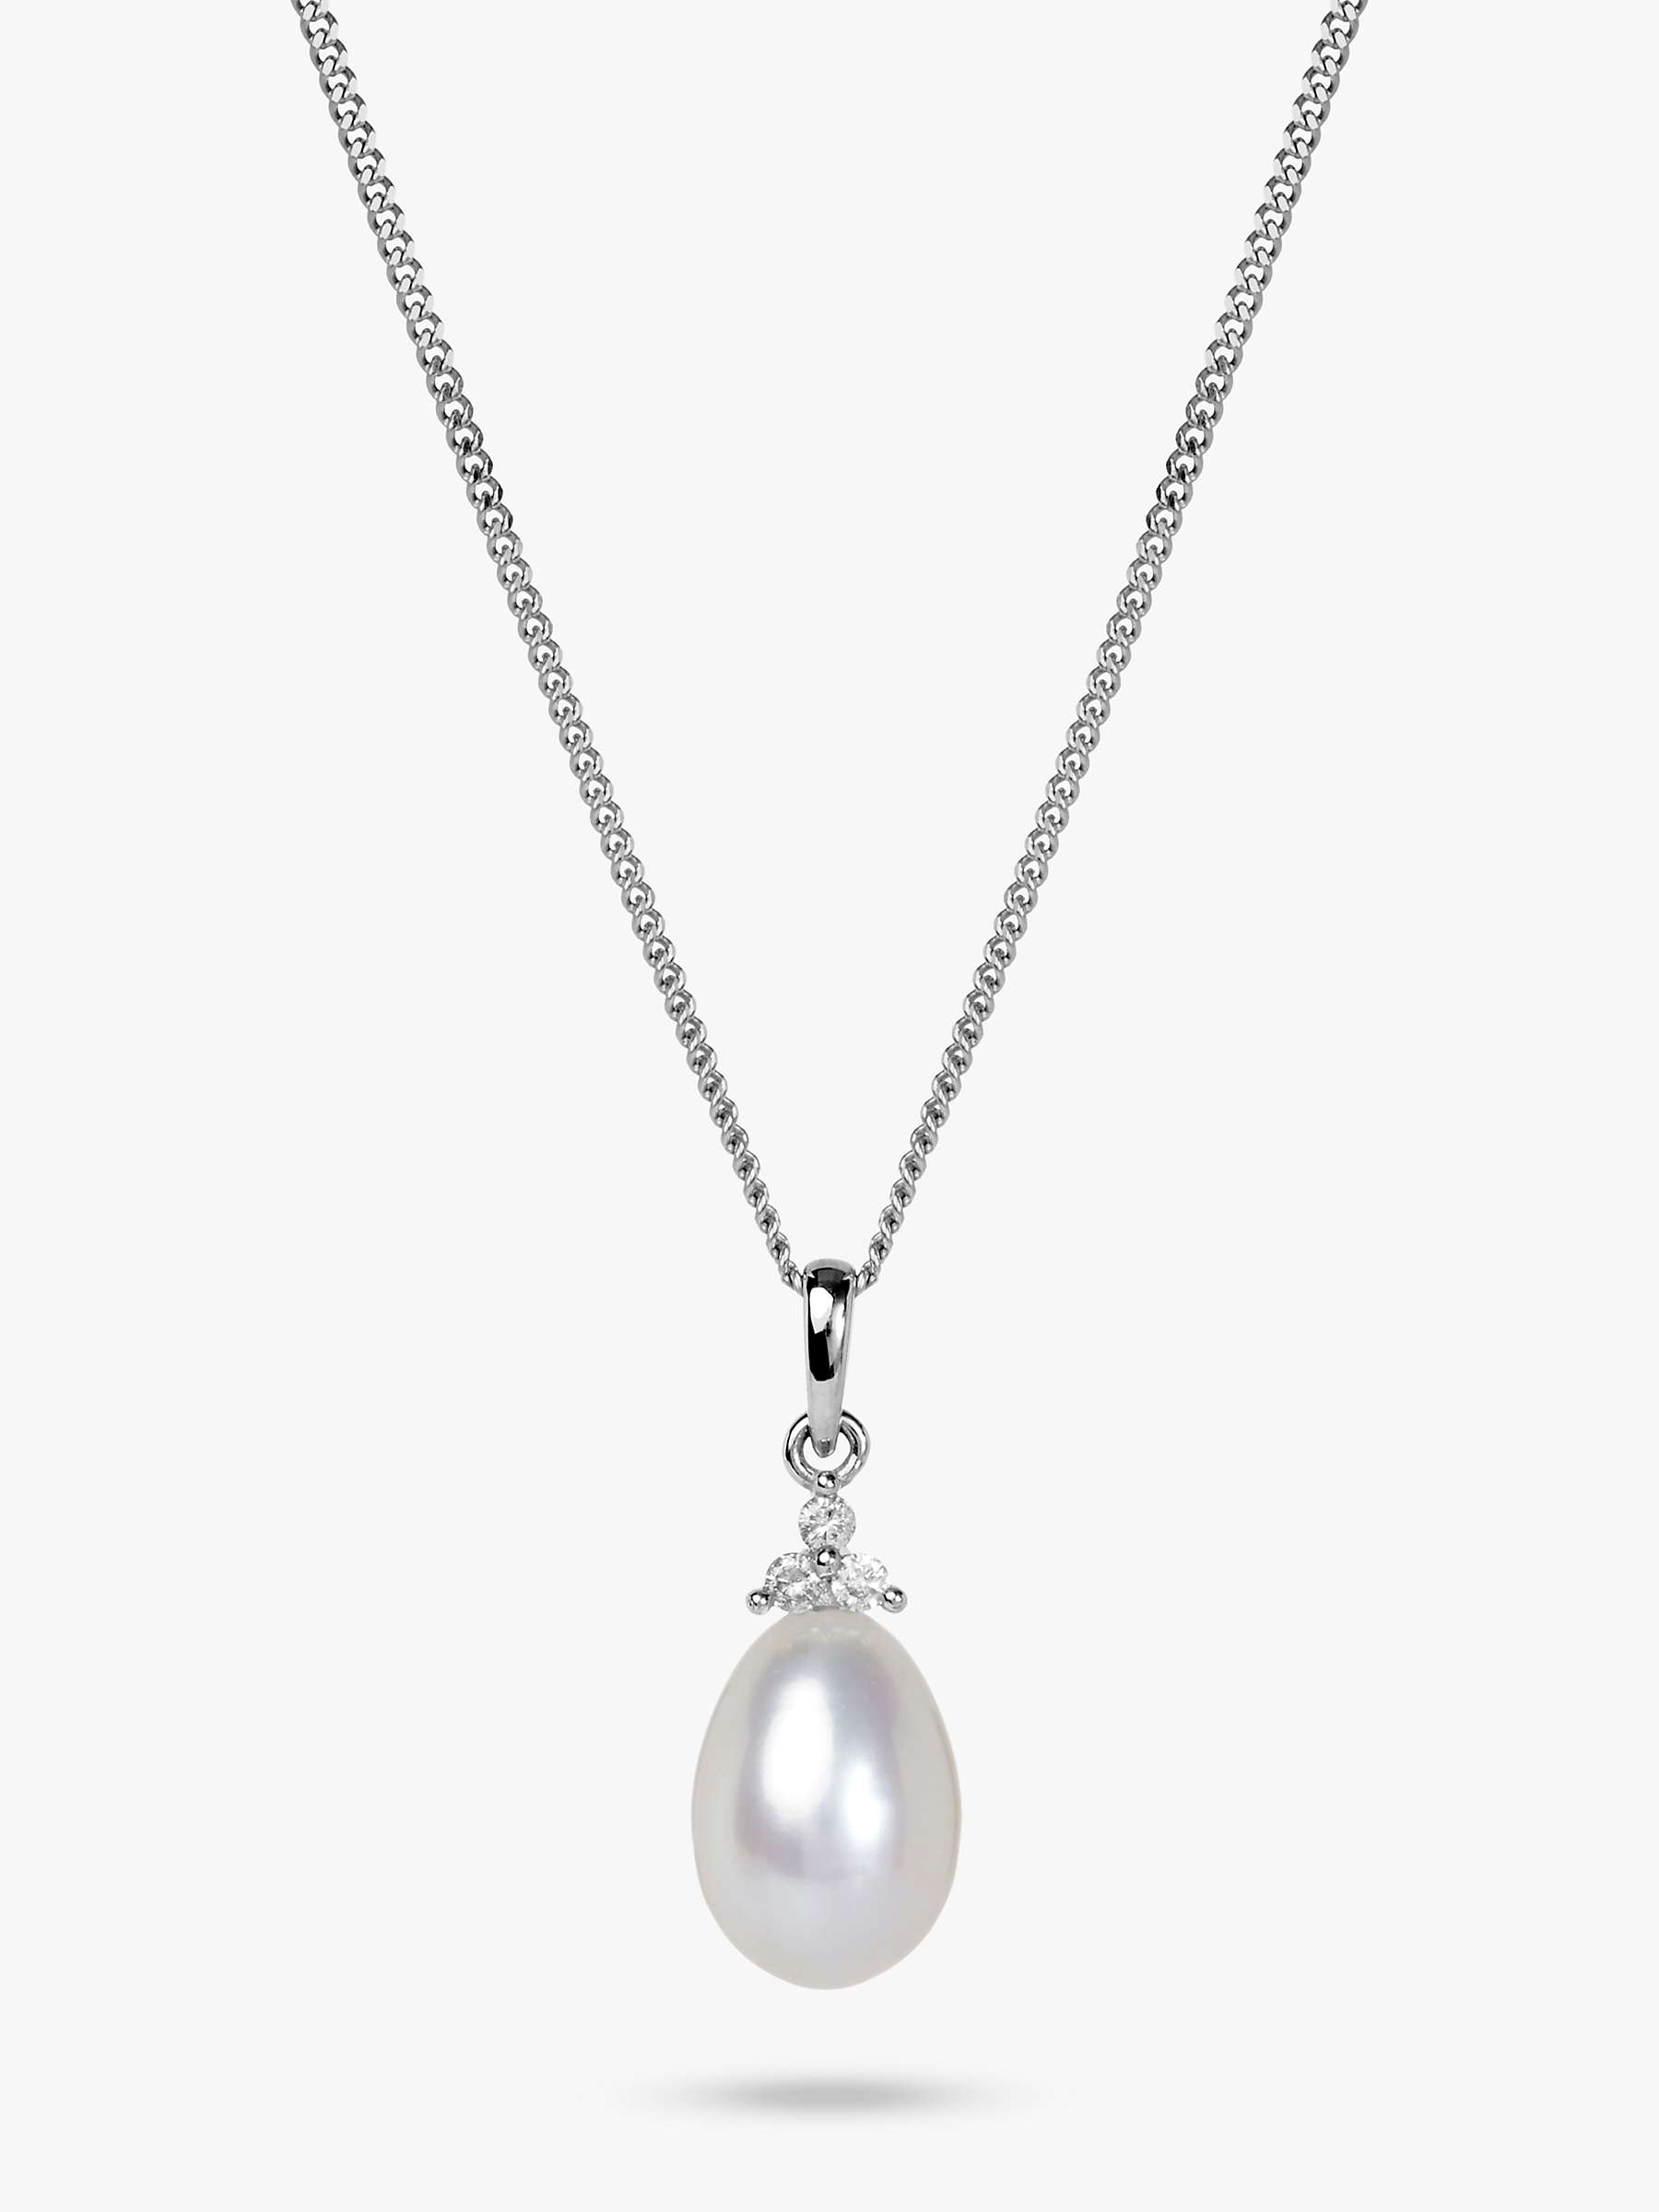 Buy A B Davis 9ct Gold Diamond and Pearl Pendant Necklace, White Gold Online at johnlewis.com